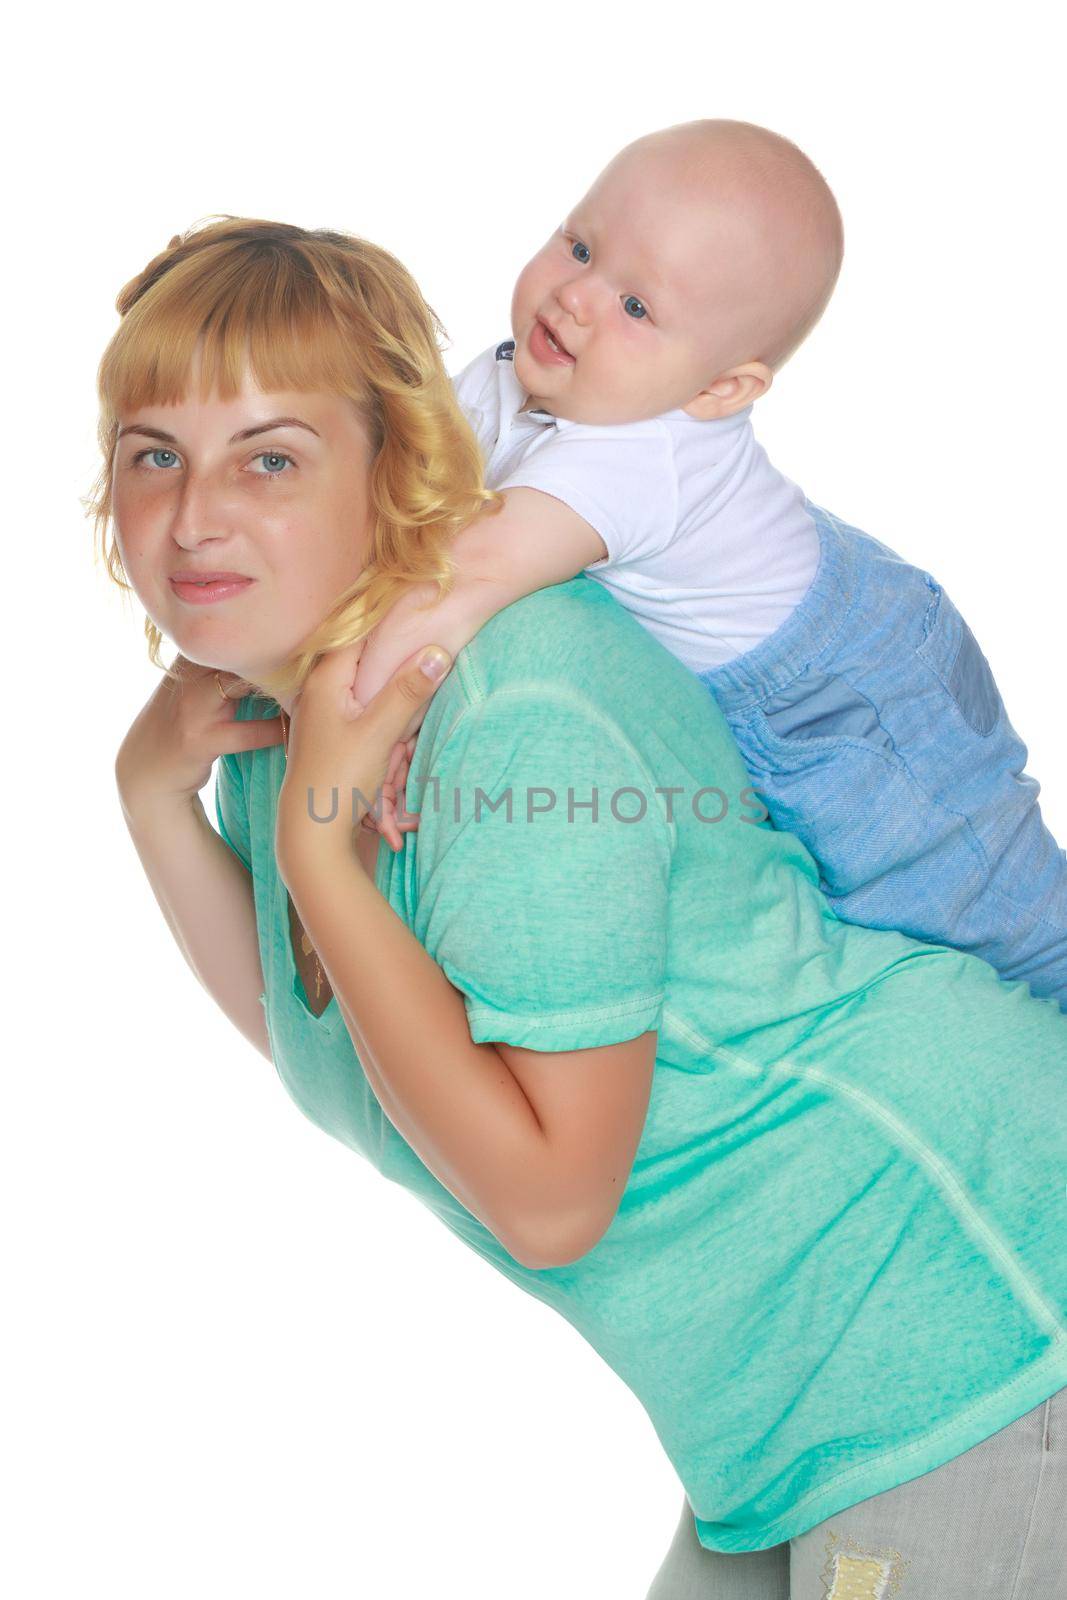 Mom holds on the shoulders of the baby. The concept of happy motherhood, family happiness, child development. Isolated on white background.